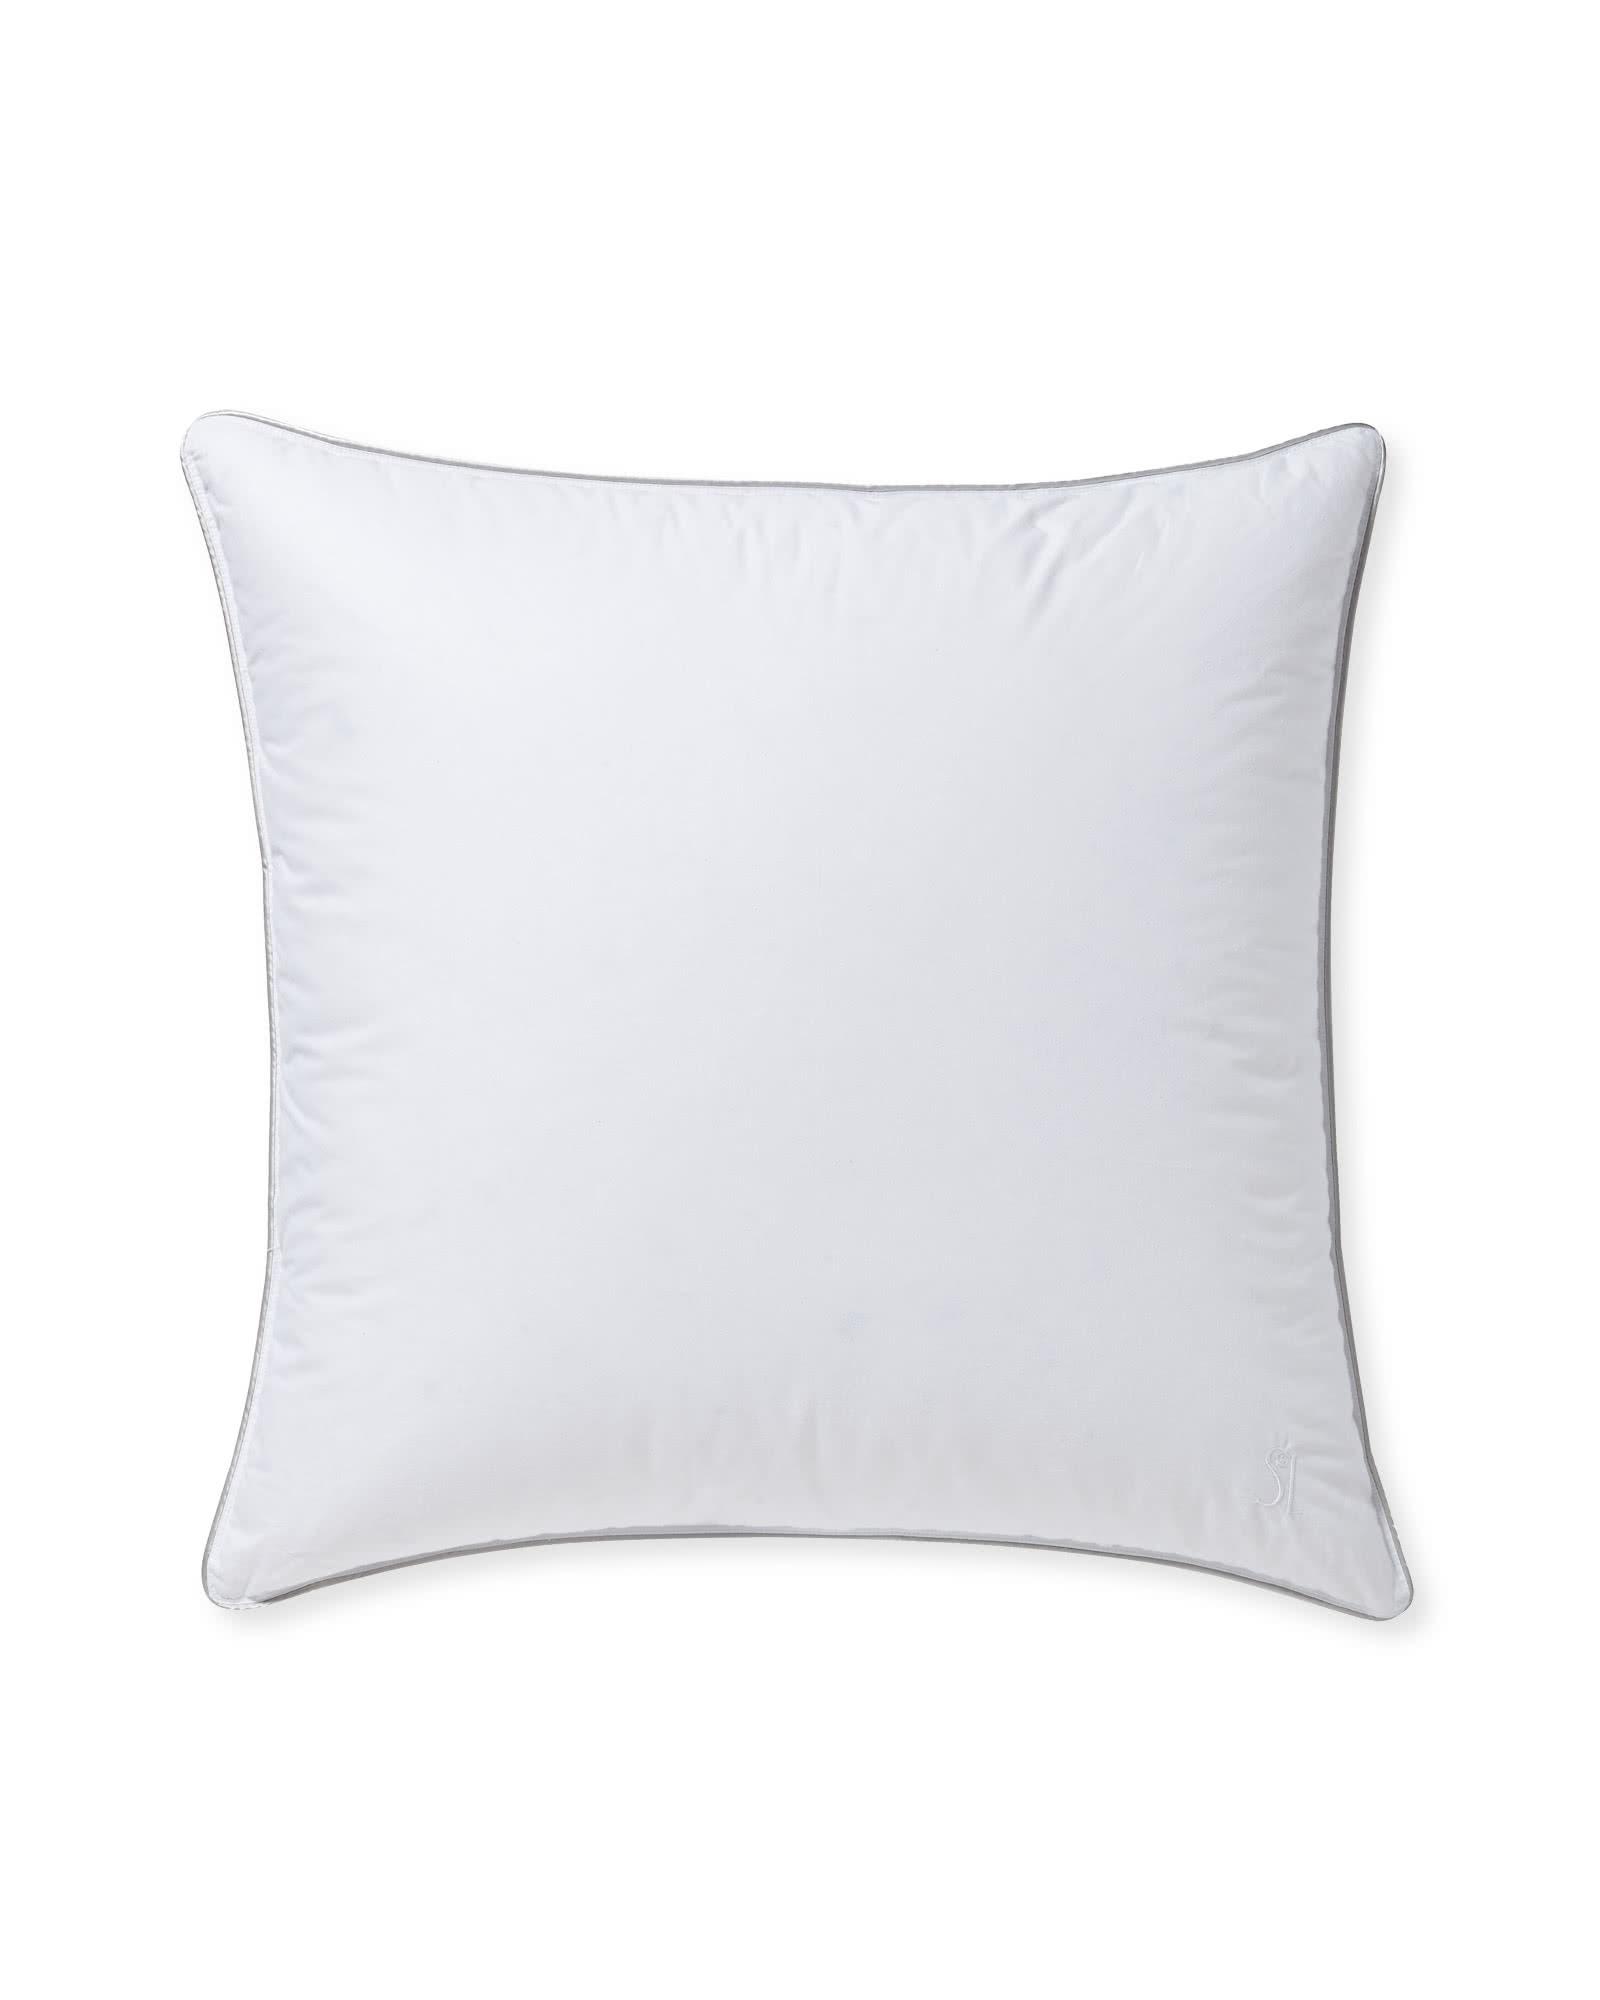 Goose Feather Throw Pillow Insert, White Bed And Couch Pillows